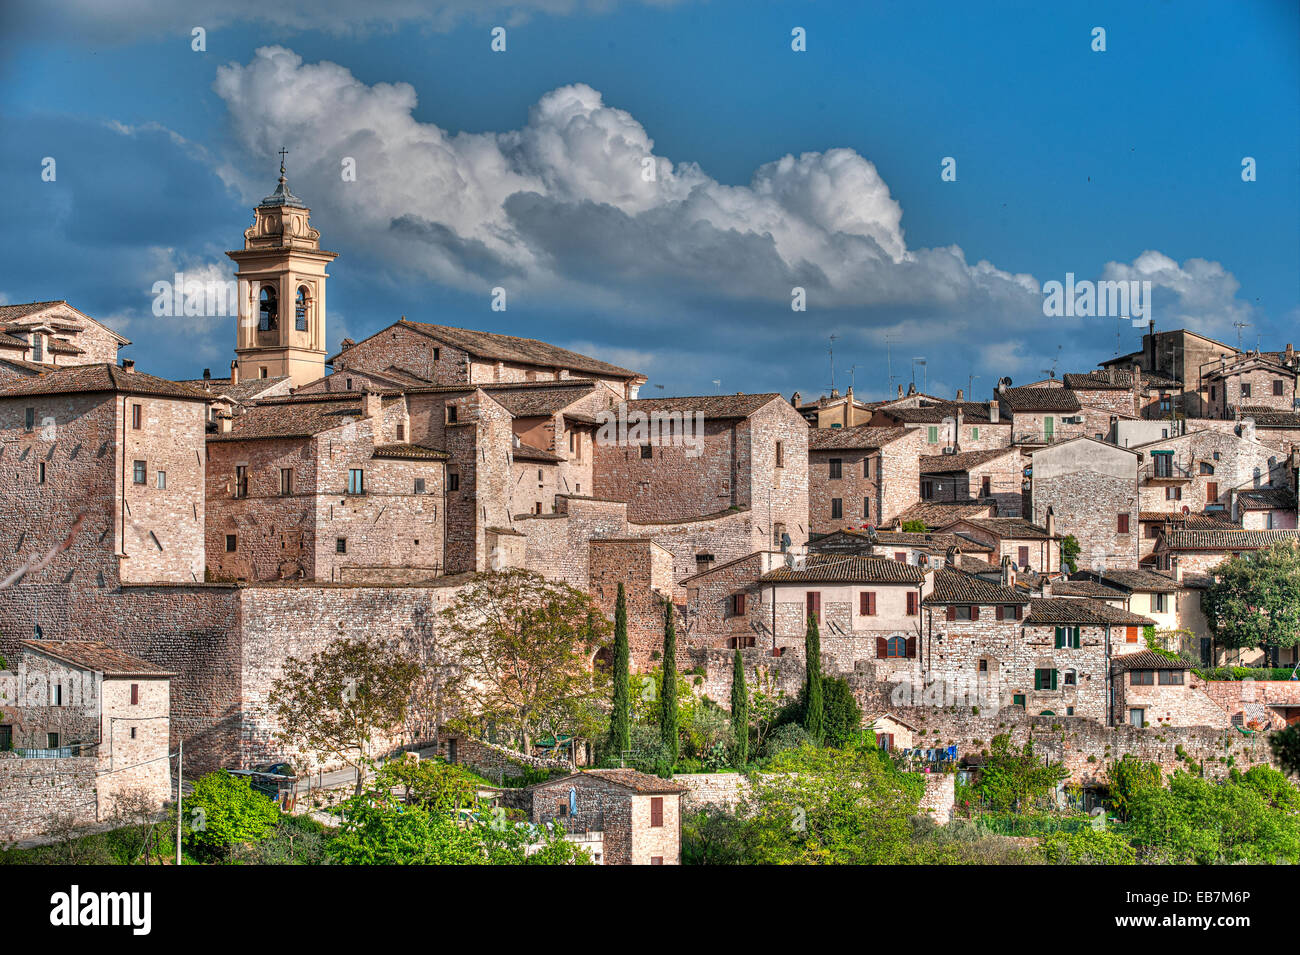 Spello, Umbria. One particular of Spello, a real jewel of history and architecture, where you see the identical houses in stone Stock Photo